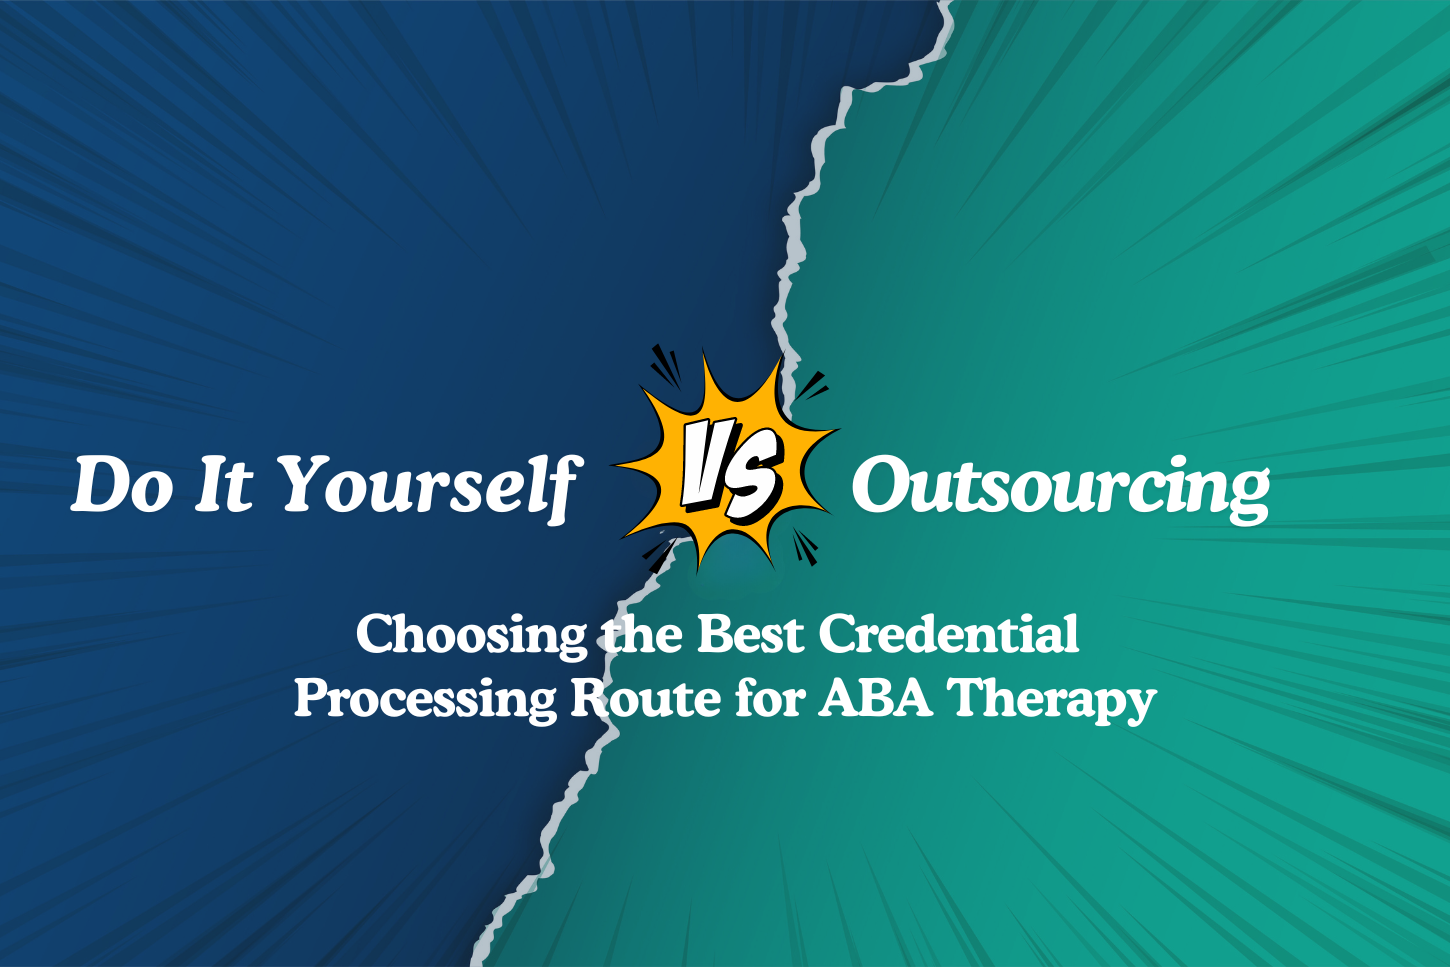 How to choose between the two credential processing routes for ABA Therapy?